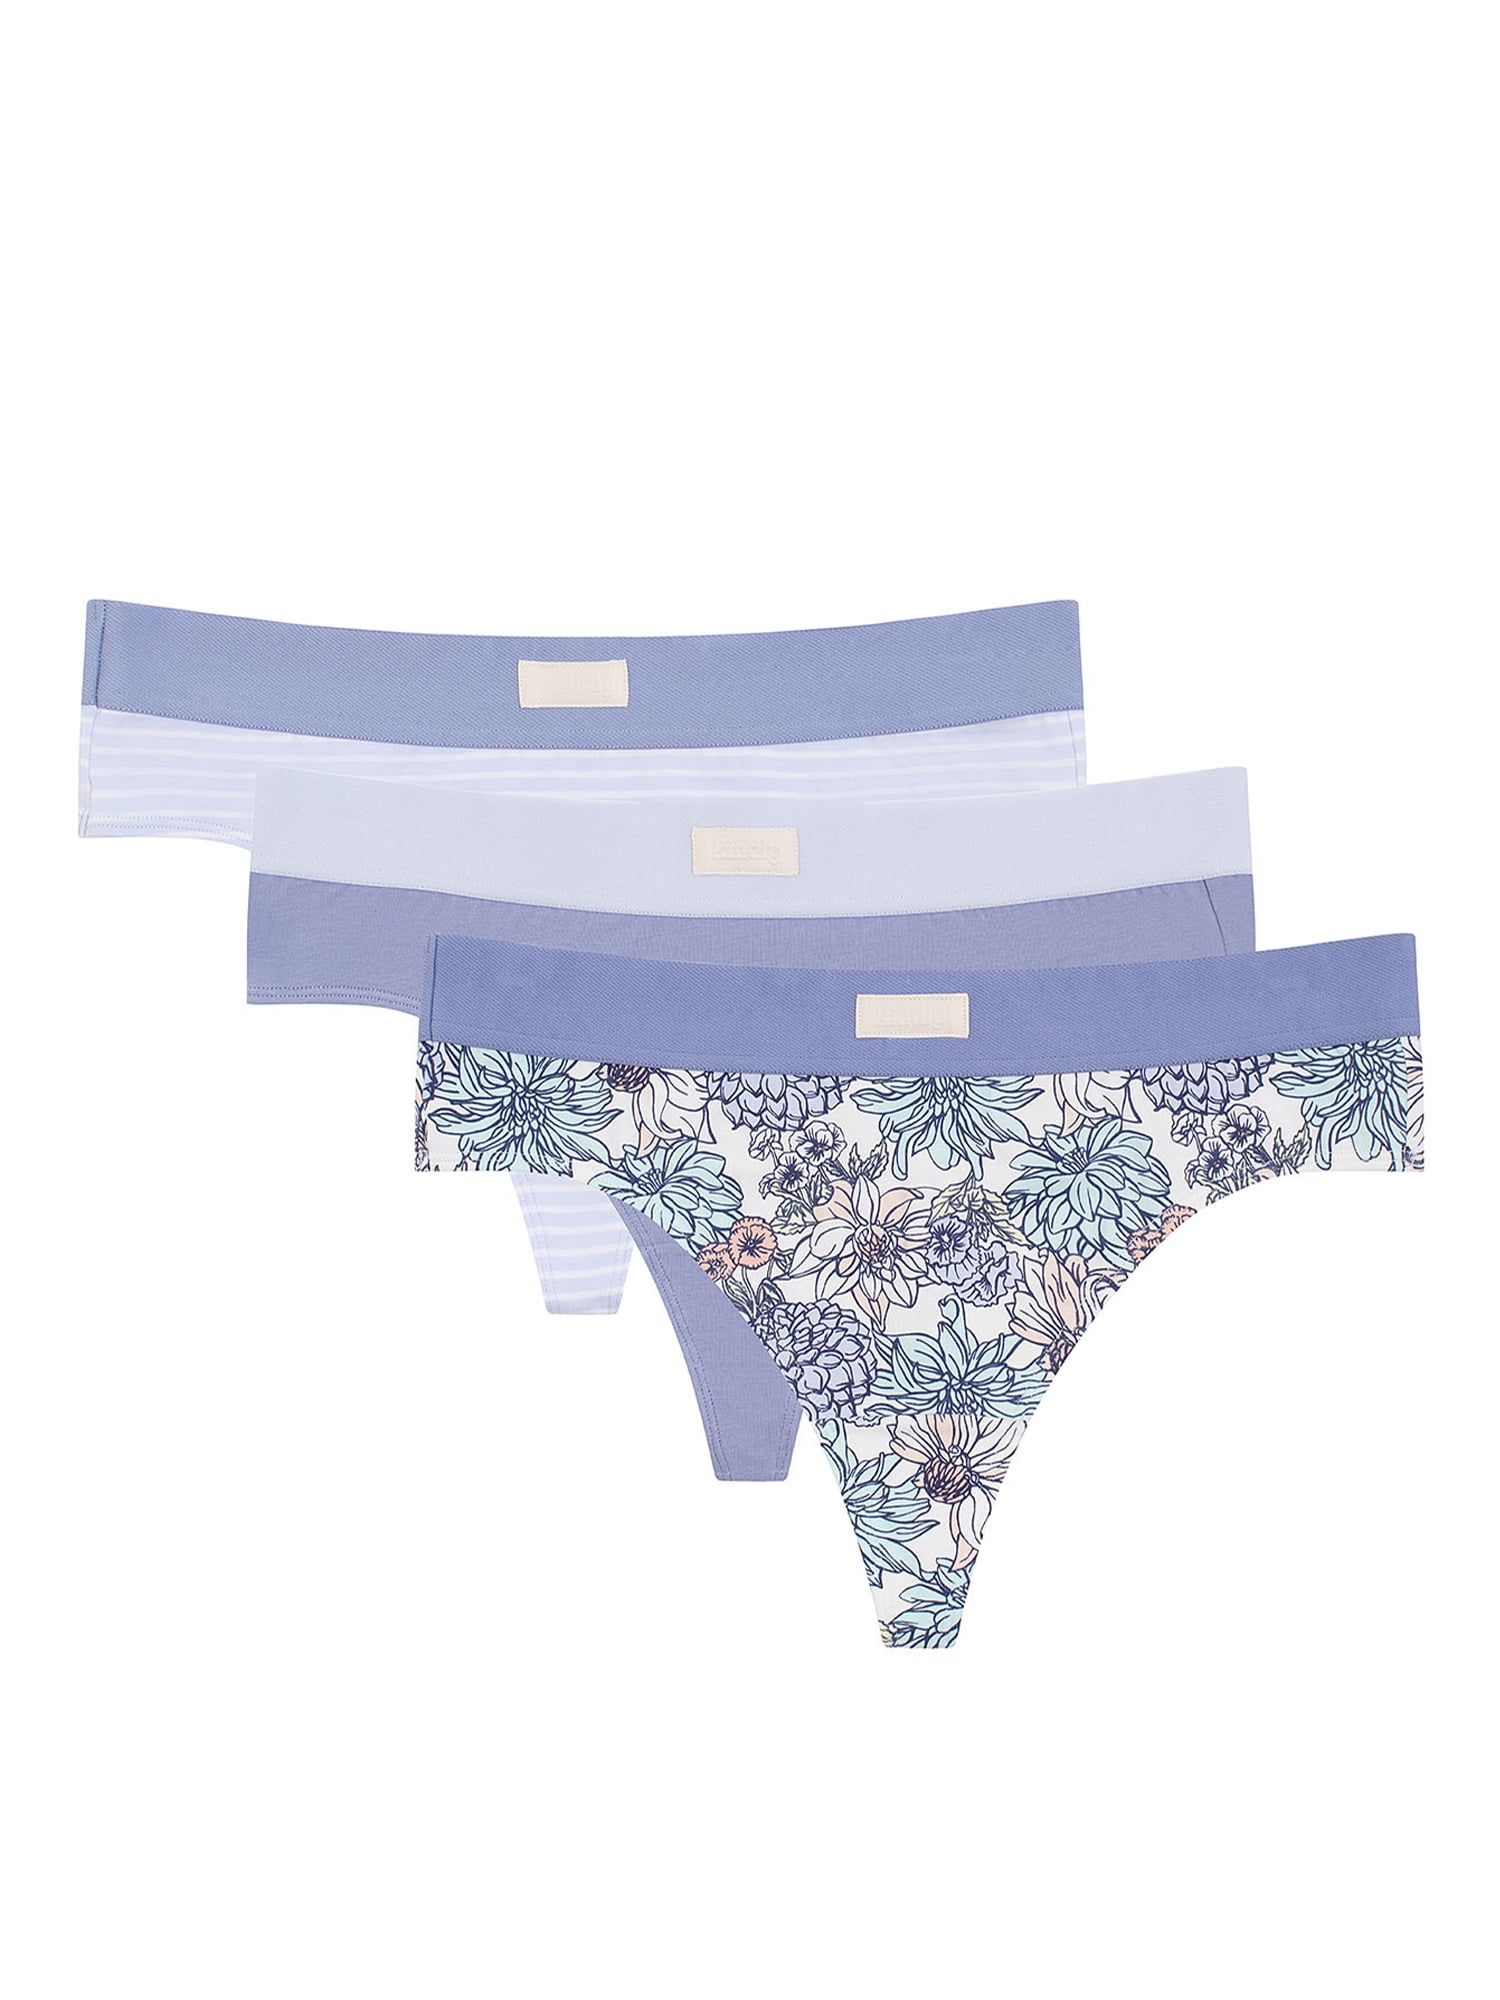 Kindly Yours Women's Seamless Hipster Underwear 3-Pack, Sizes